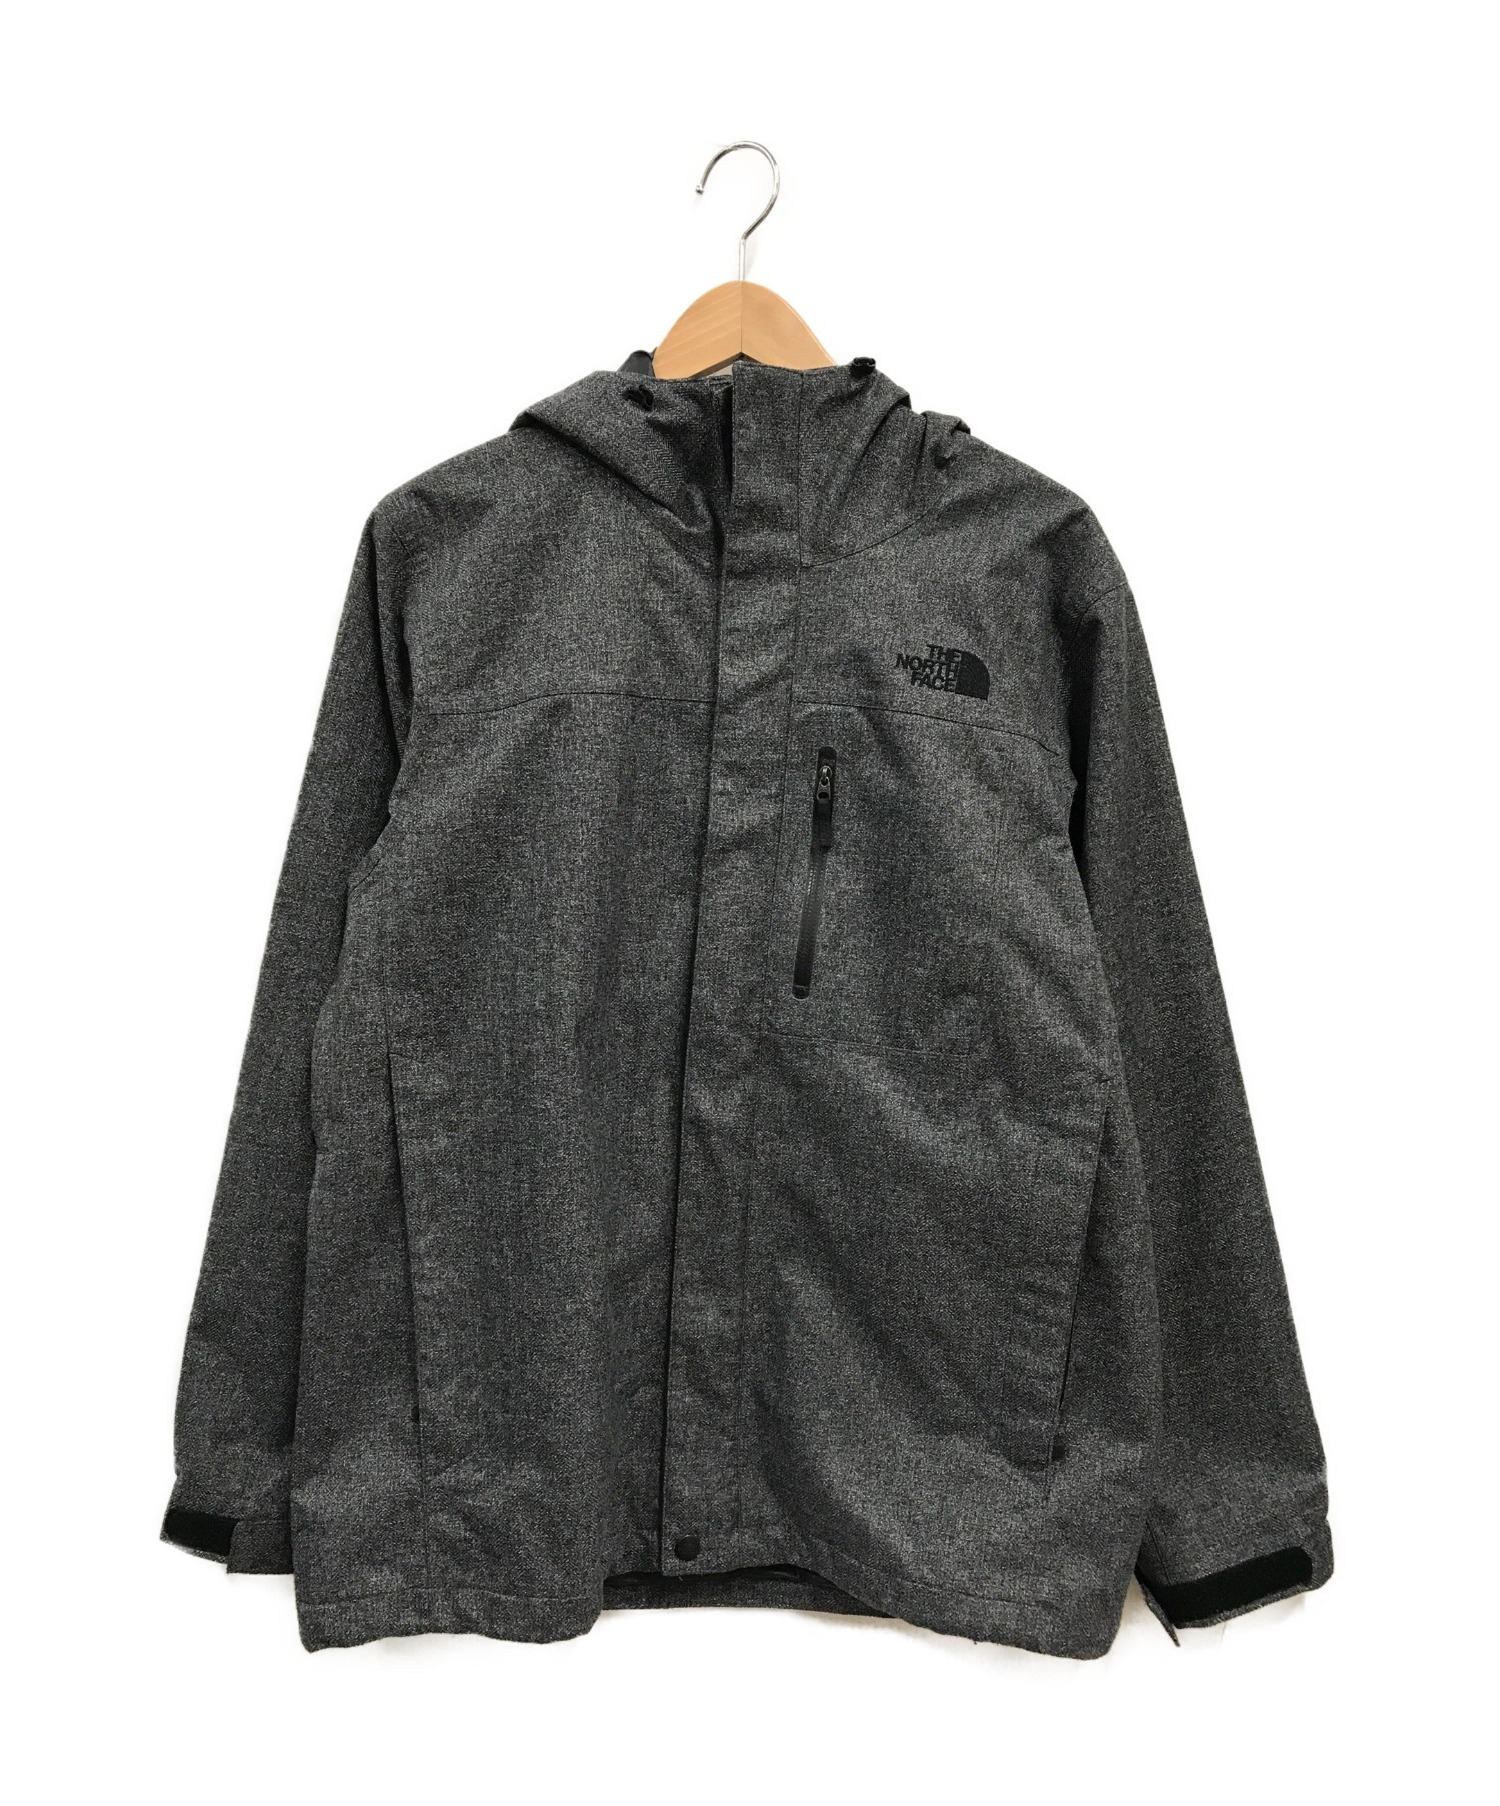 01113● THE NORTH FACE NOVELTY ZEUS